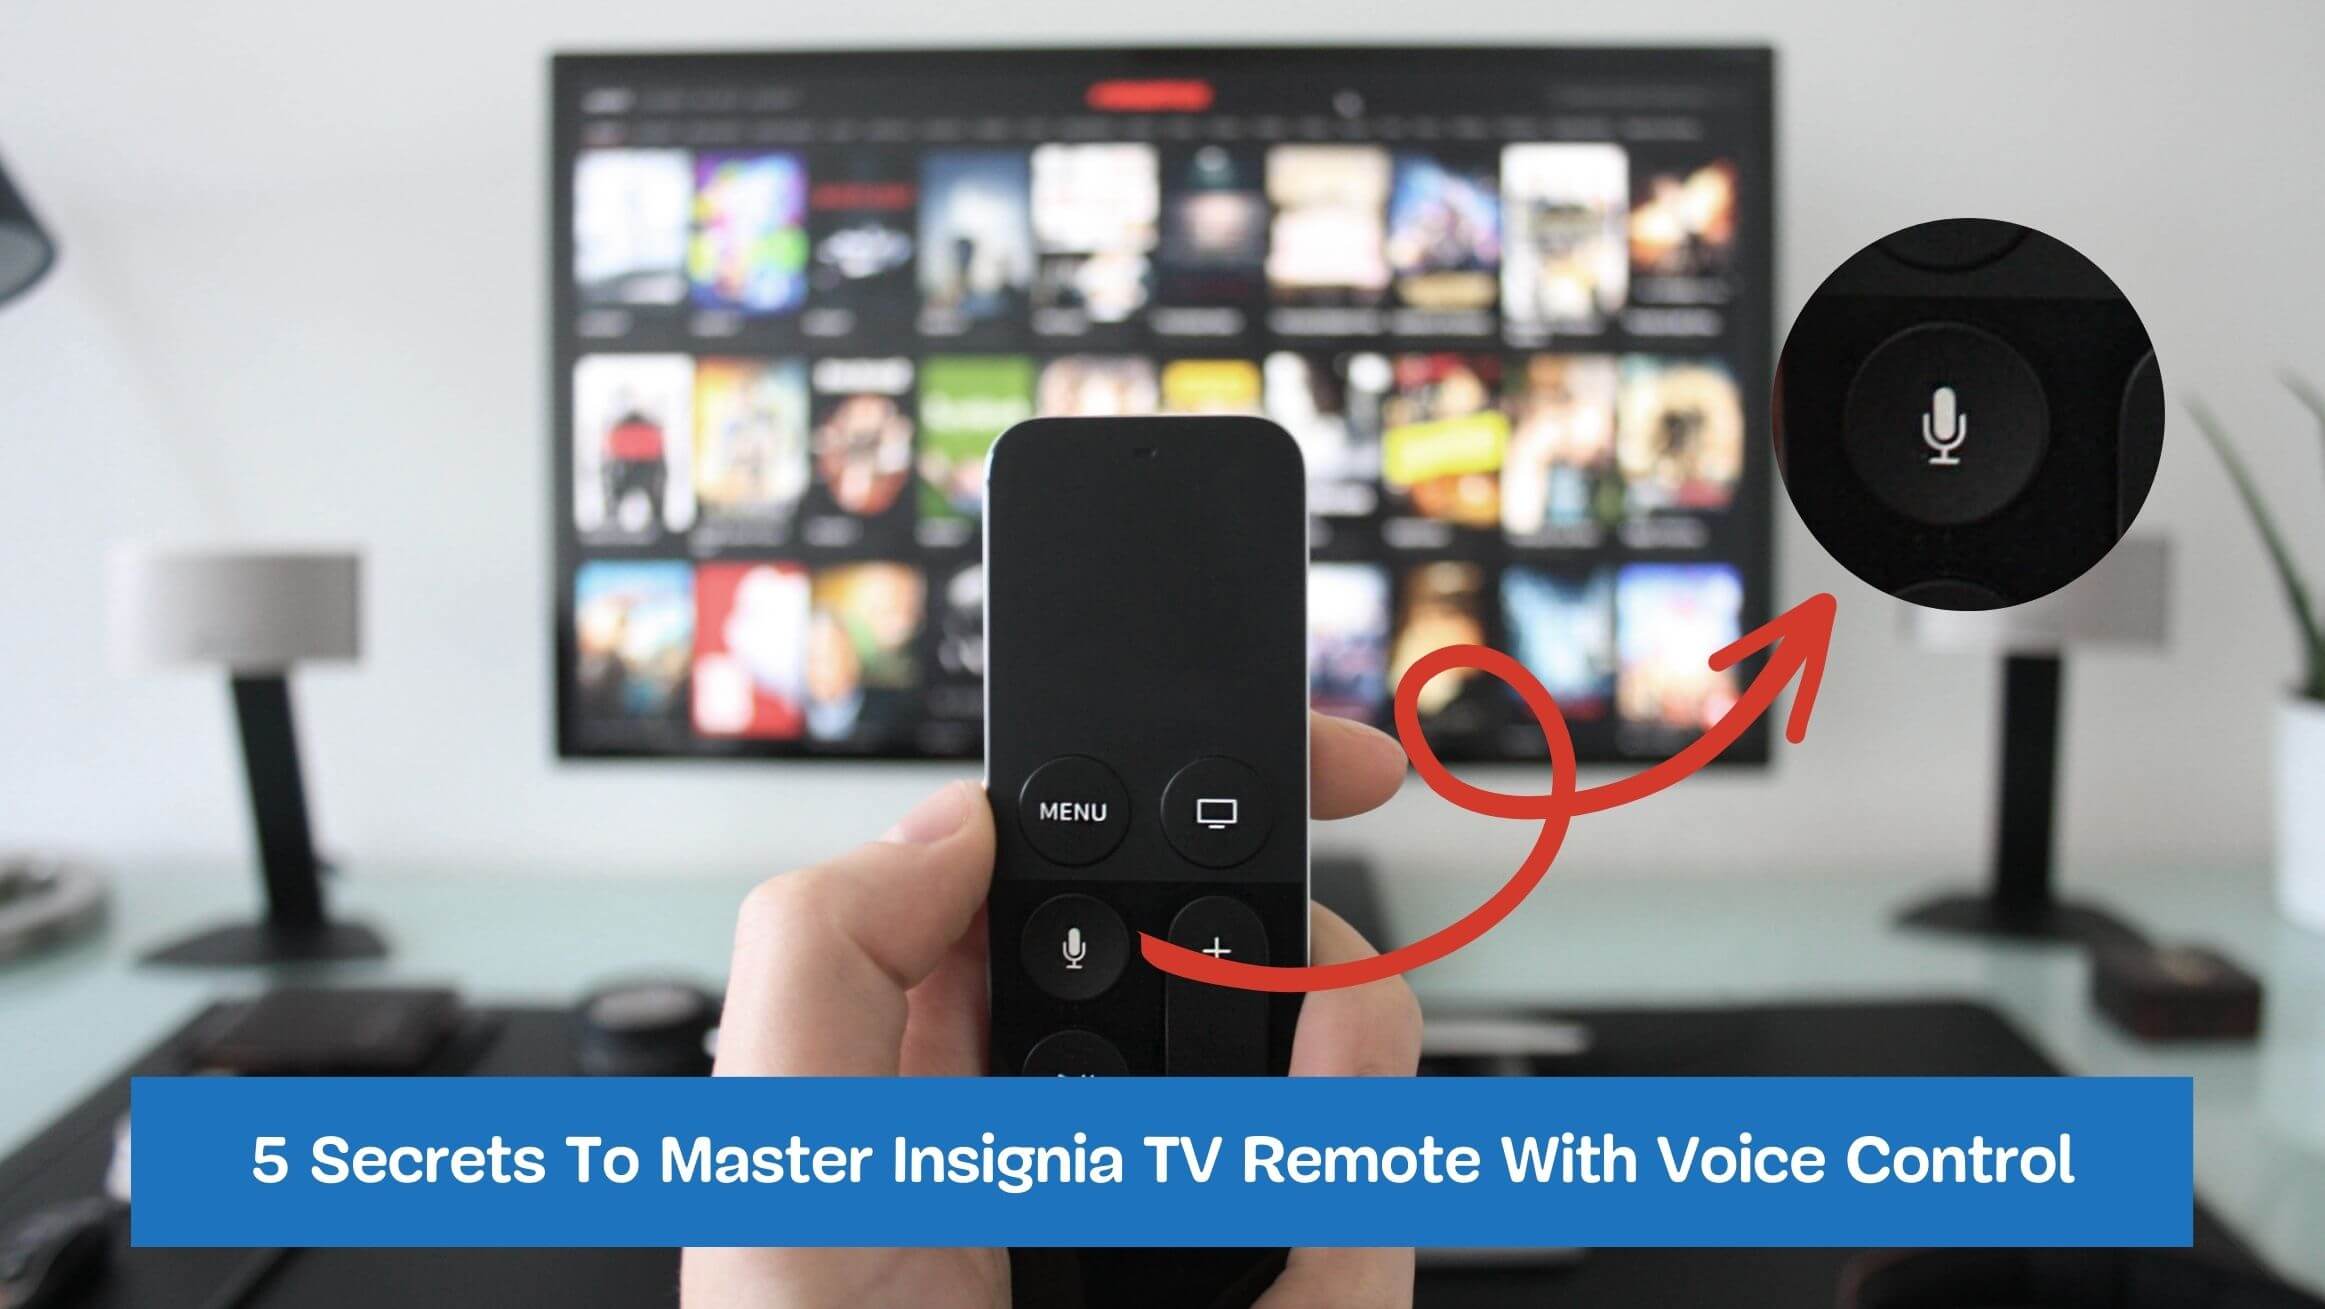 5 Secrets To Master Insignia TV Remote With Voice Control